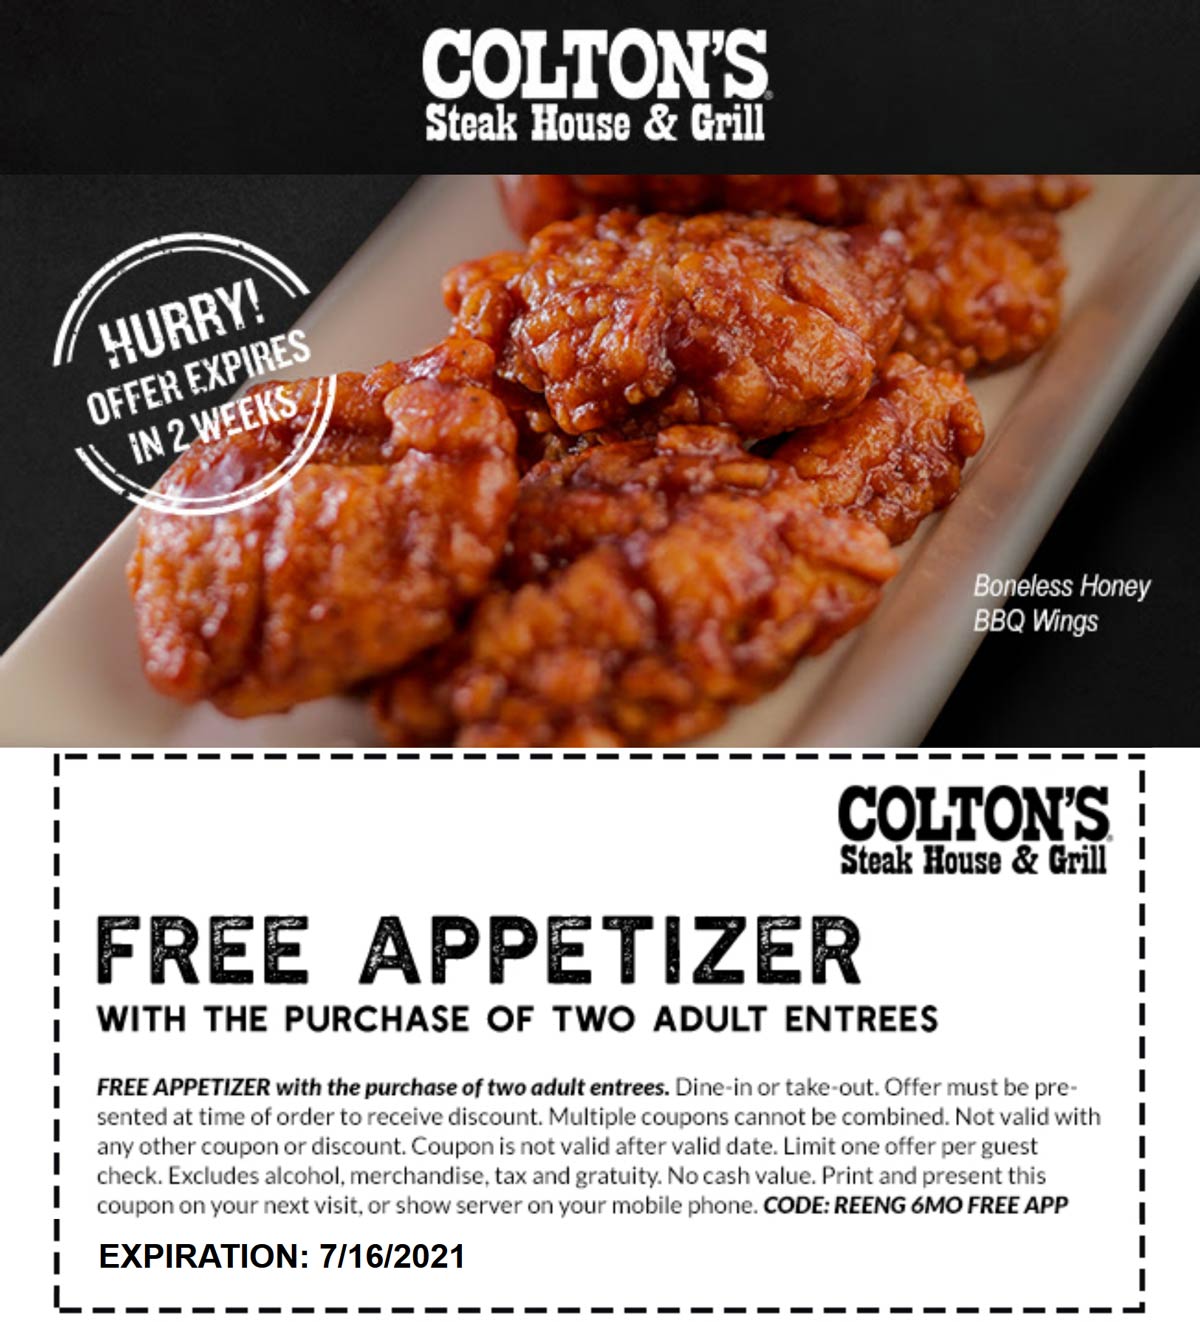 Coltons restaurants Coupon  Free appetizer with your entrees at Coltons Steak House & Grill #coltons 